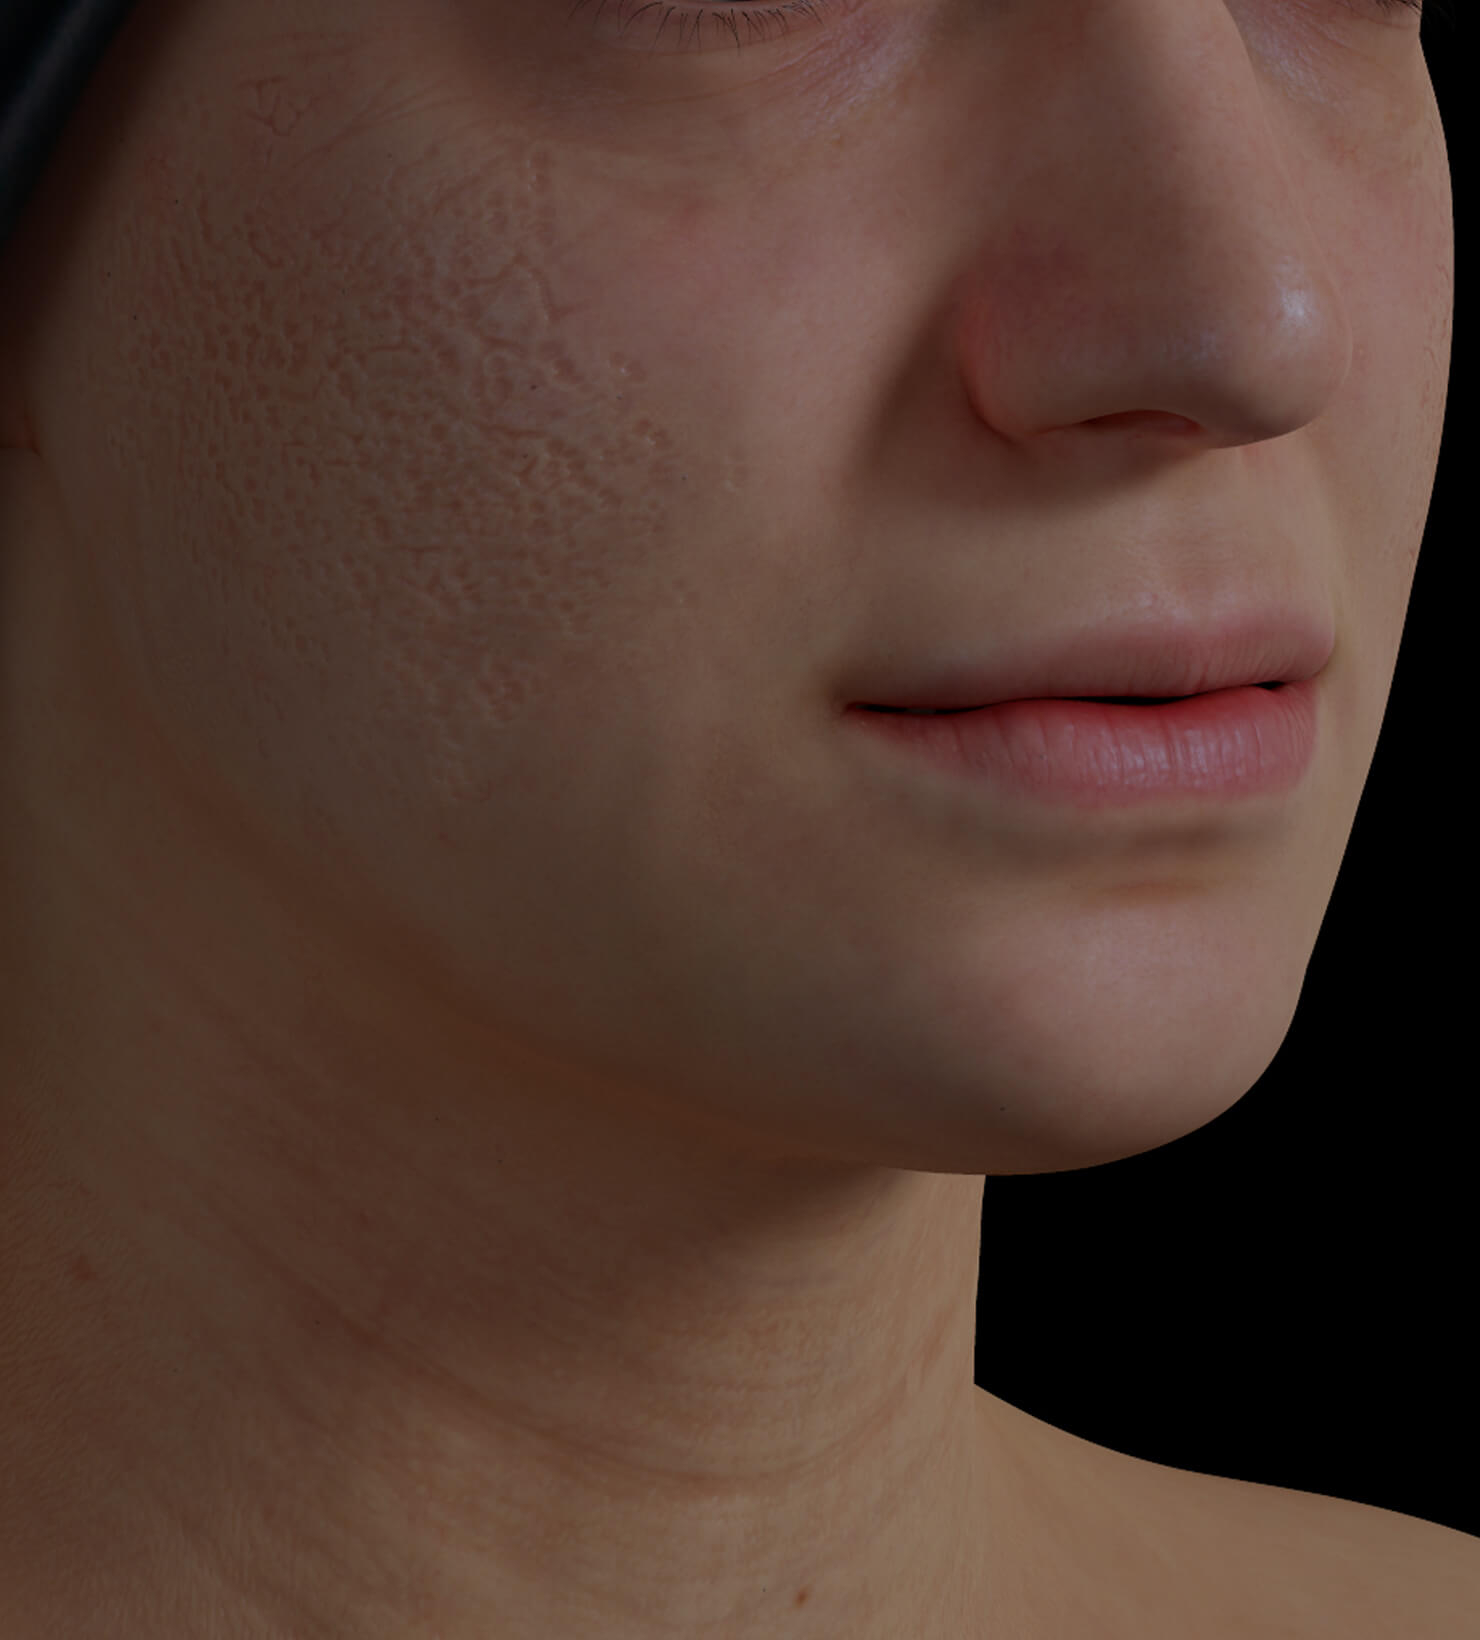 Clinique Chloé female patient with acne scars on the face getting treated with dermal fillers